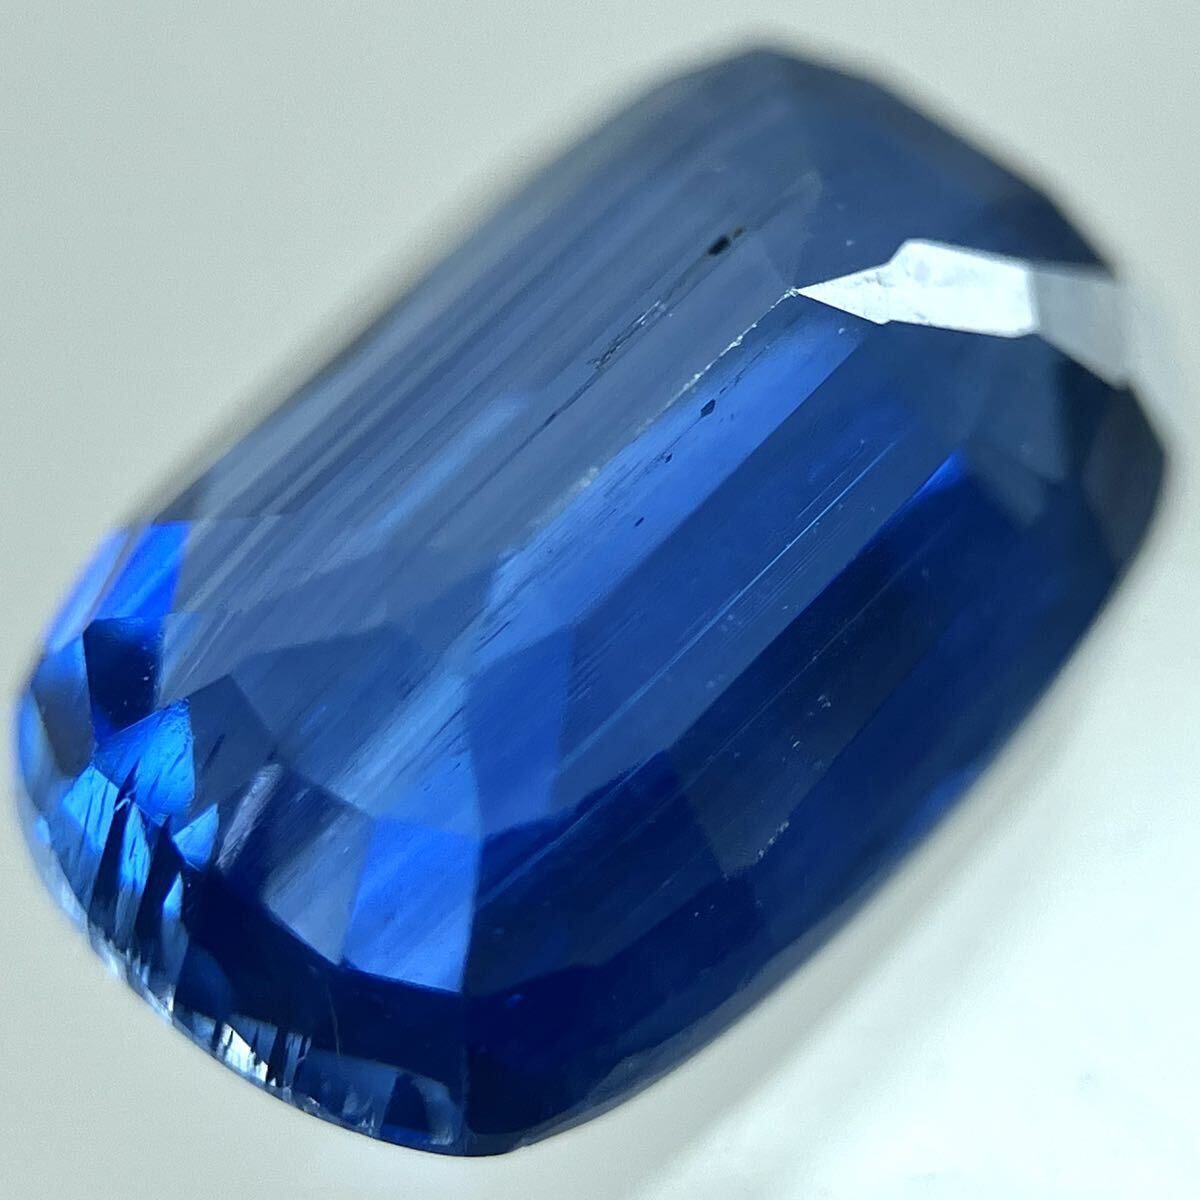 2.1ctUP!!［天然カイヤナイト2.176ct］A 約9.0×5.7mm ルース 裸石 宝石 ジュエリー kyanite DB0/テEA0の画像2